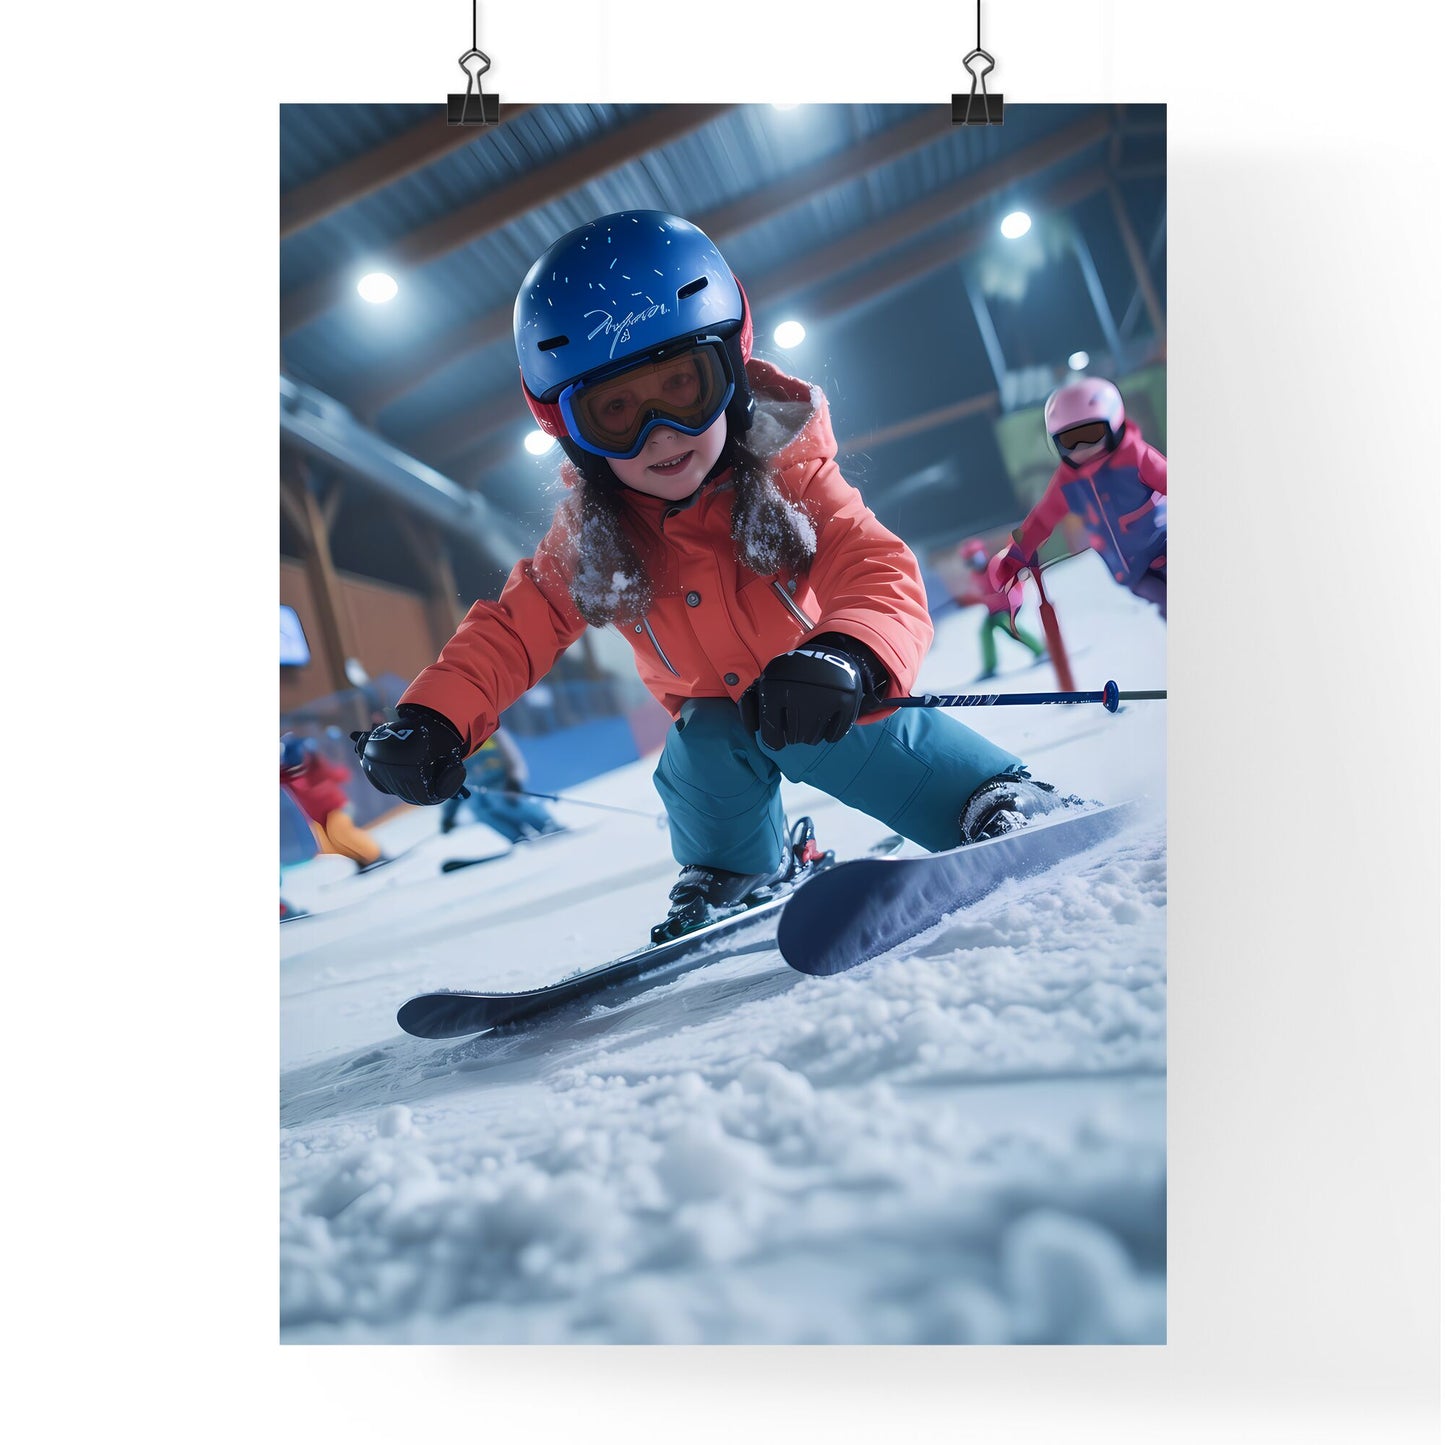 In the indoor ski resort, skiers gallop on the snow track - Art print of a girl in a helmet and skis Default Title